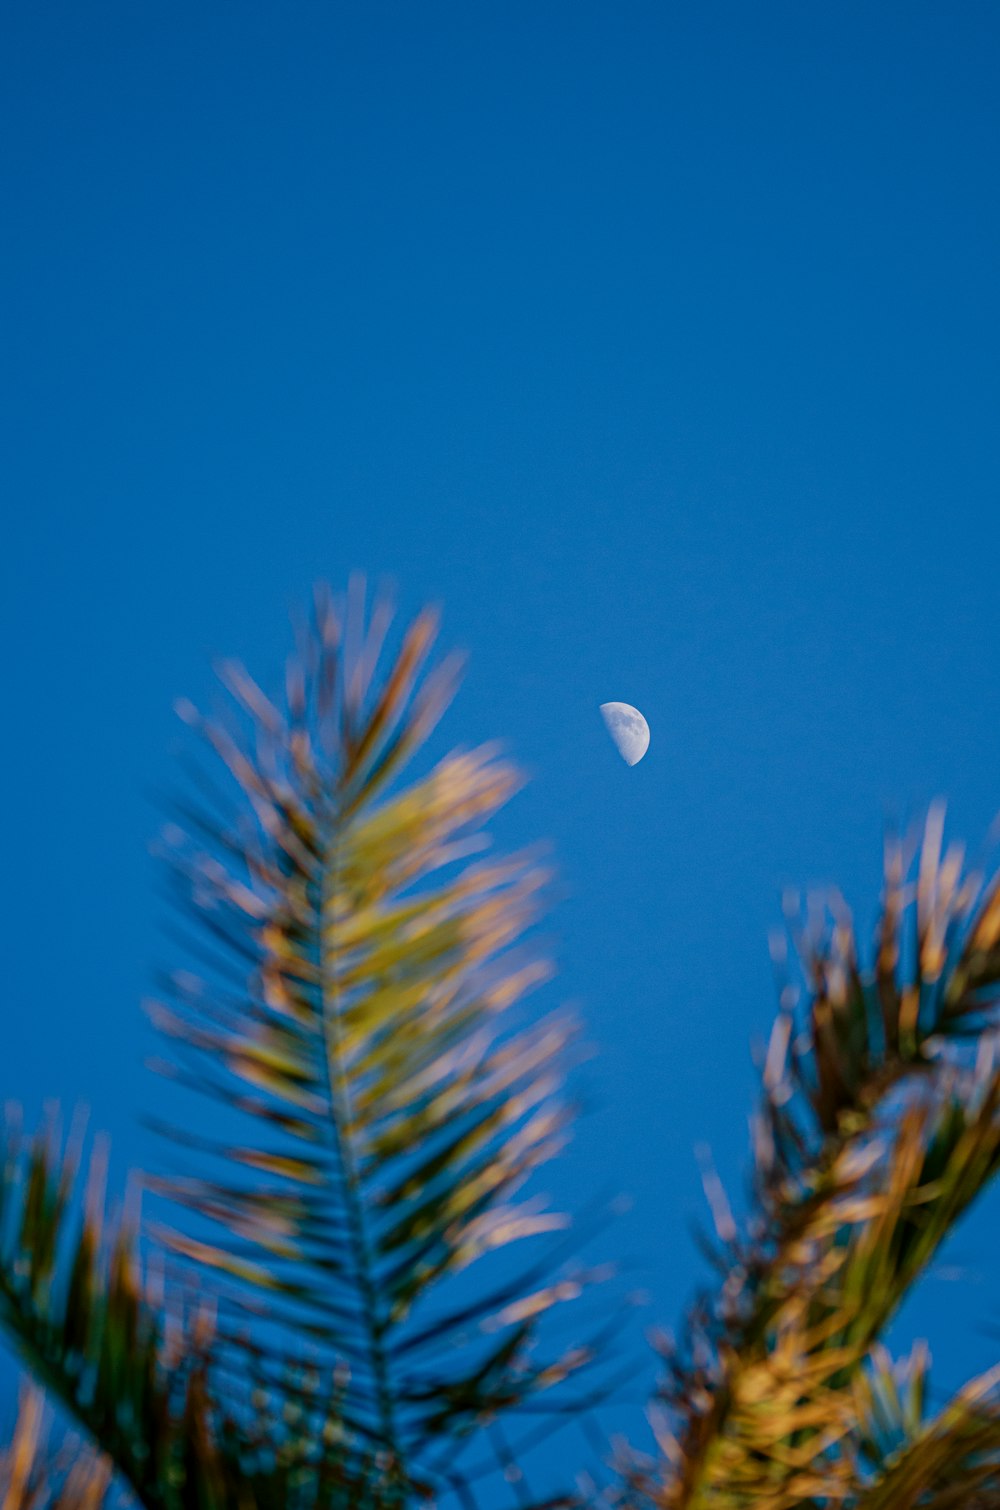 a half moon seen through the branches of a palm tree